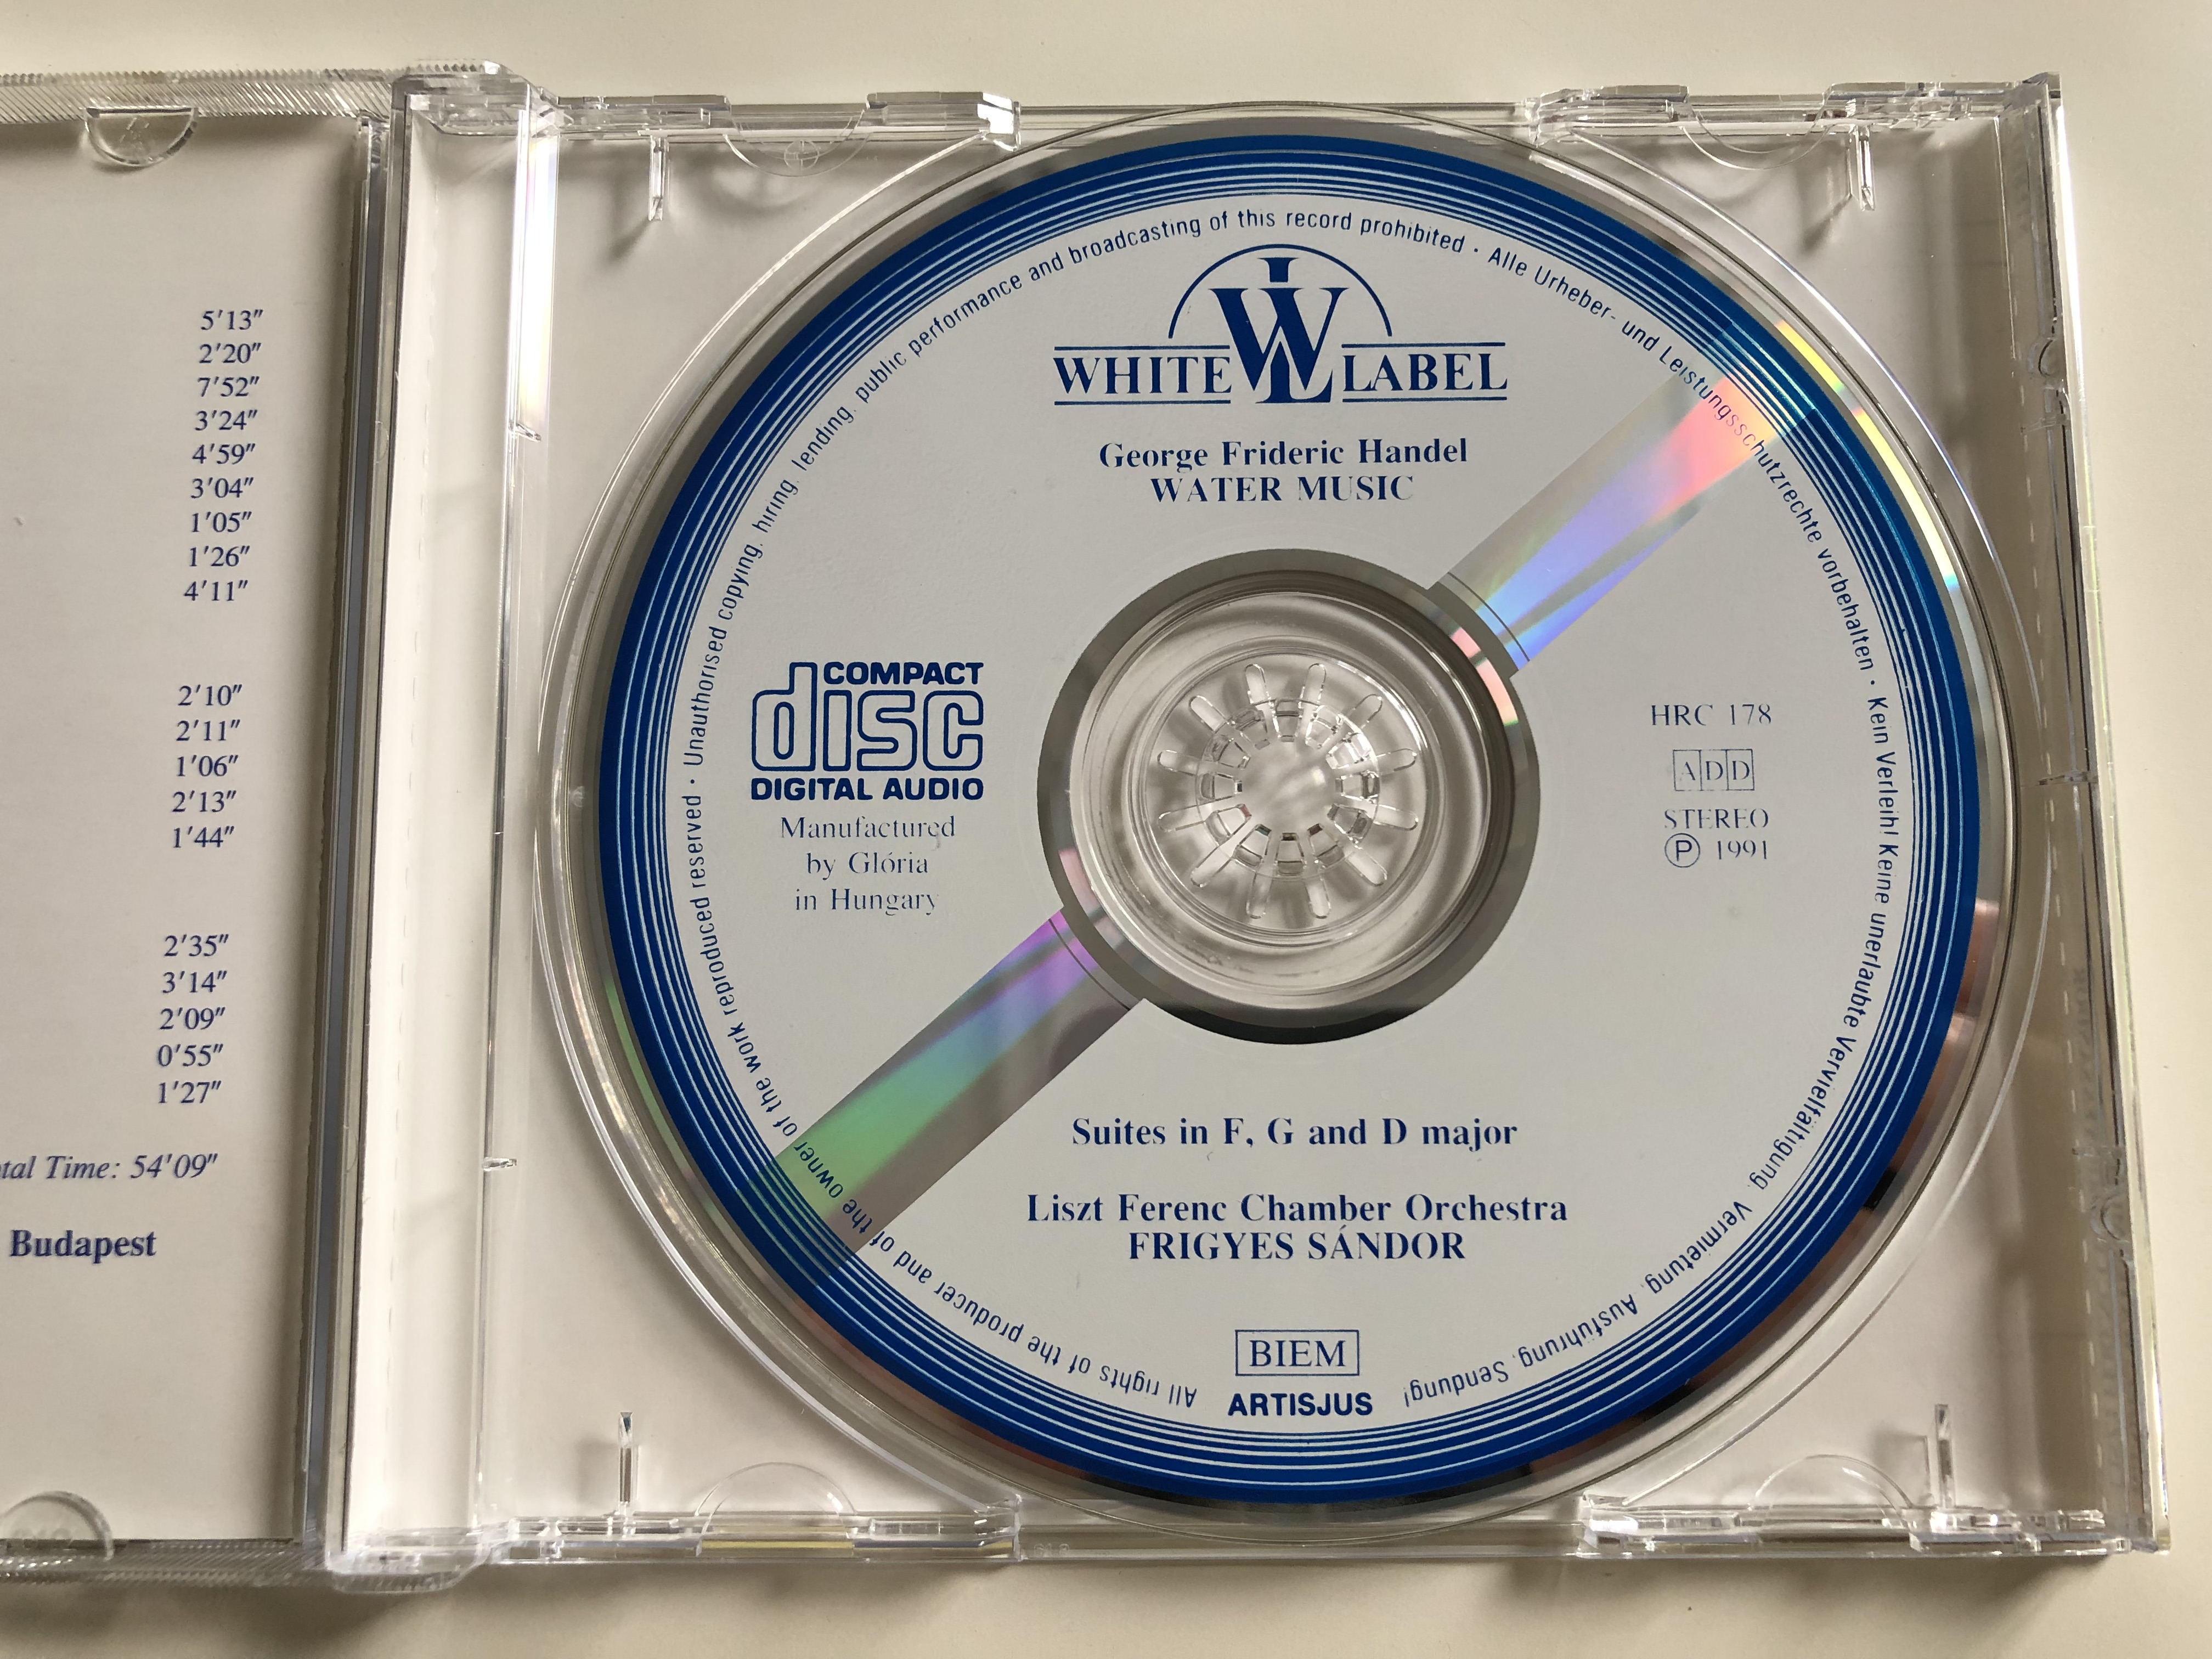 g.f.-handel-water-music-complete-liszt-ferenc-chamber-orchestra-conducted-by-frigyes-s-ndor-hungaroton-white-label-audio-cd-1991-hrc-178-4-.jpg